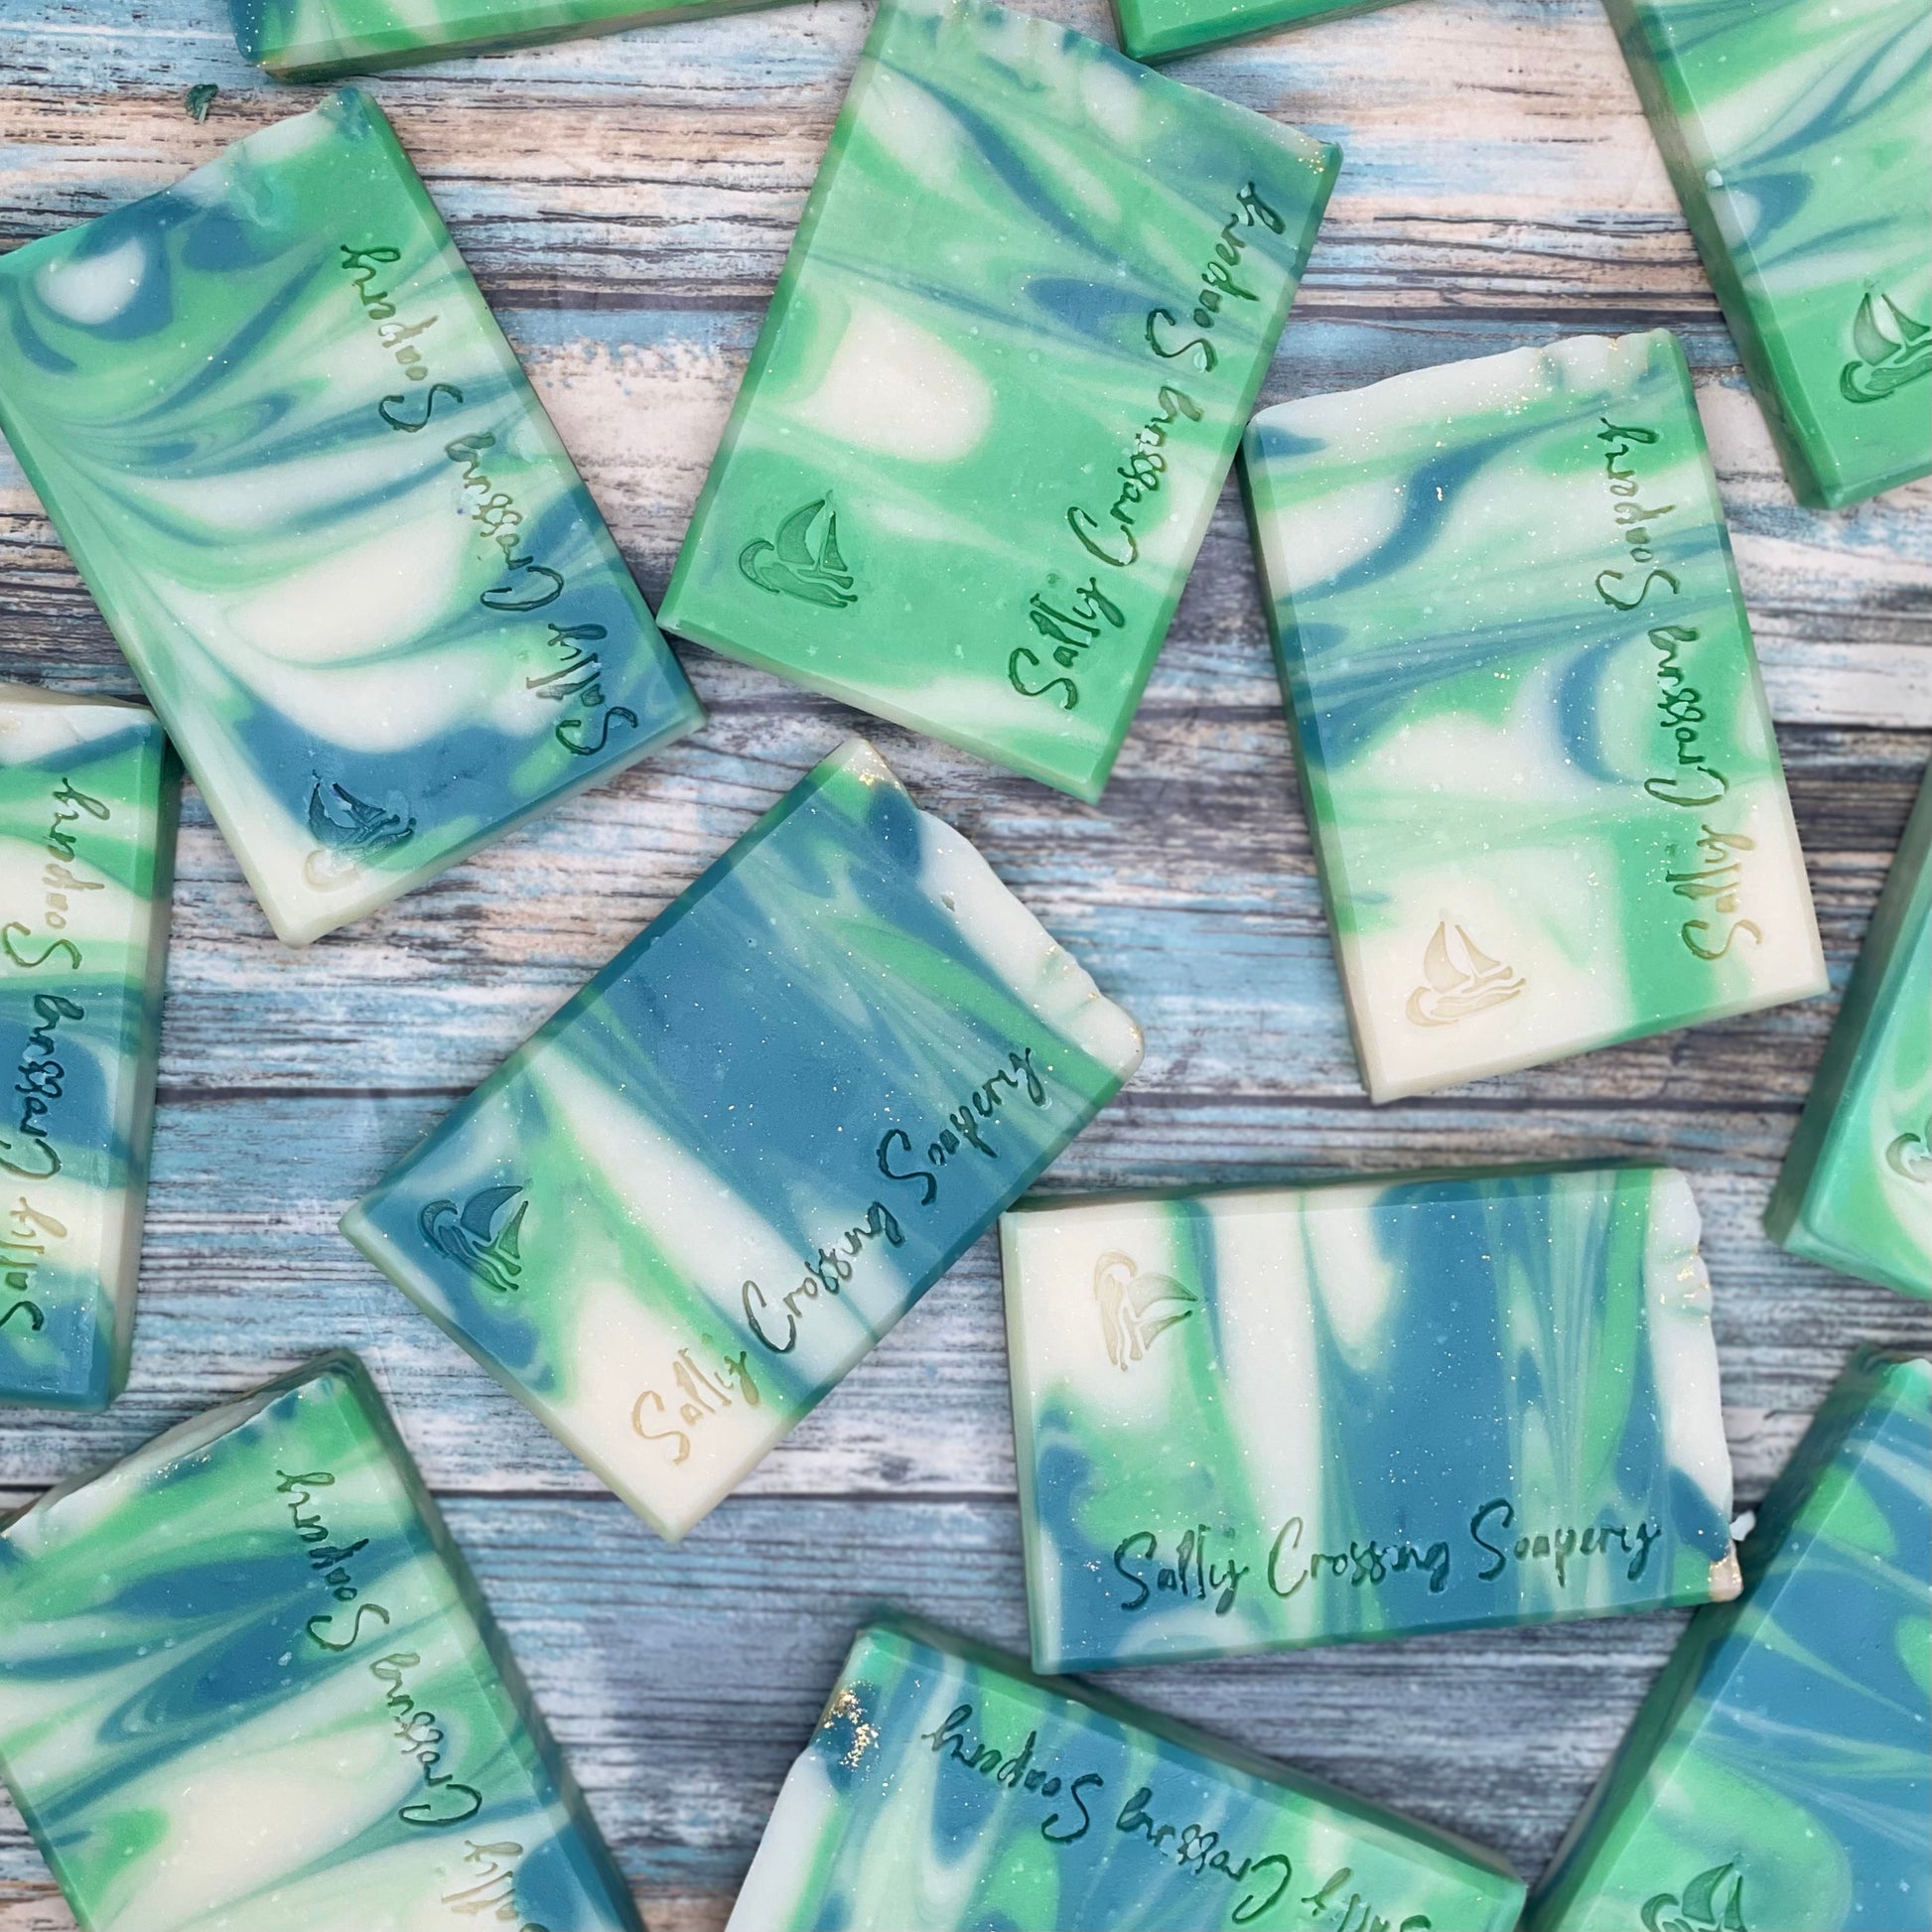 Arrangement of soap bars. Each bar is swirled with three colors-deep green, bright green, and white-and stamped with a small sailboat graphic and salty crossing Soapery text